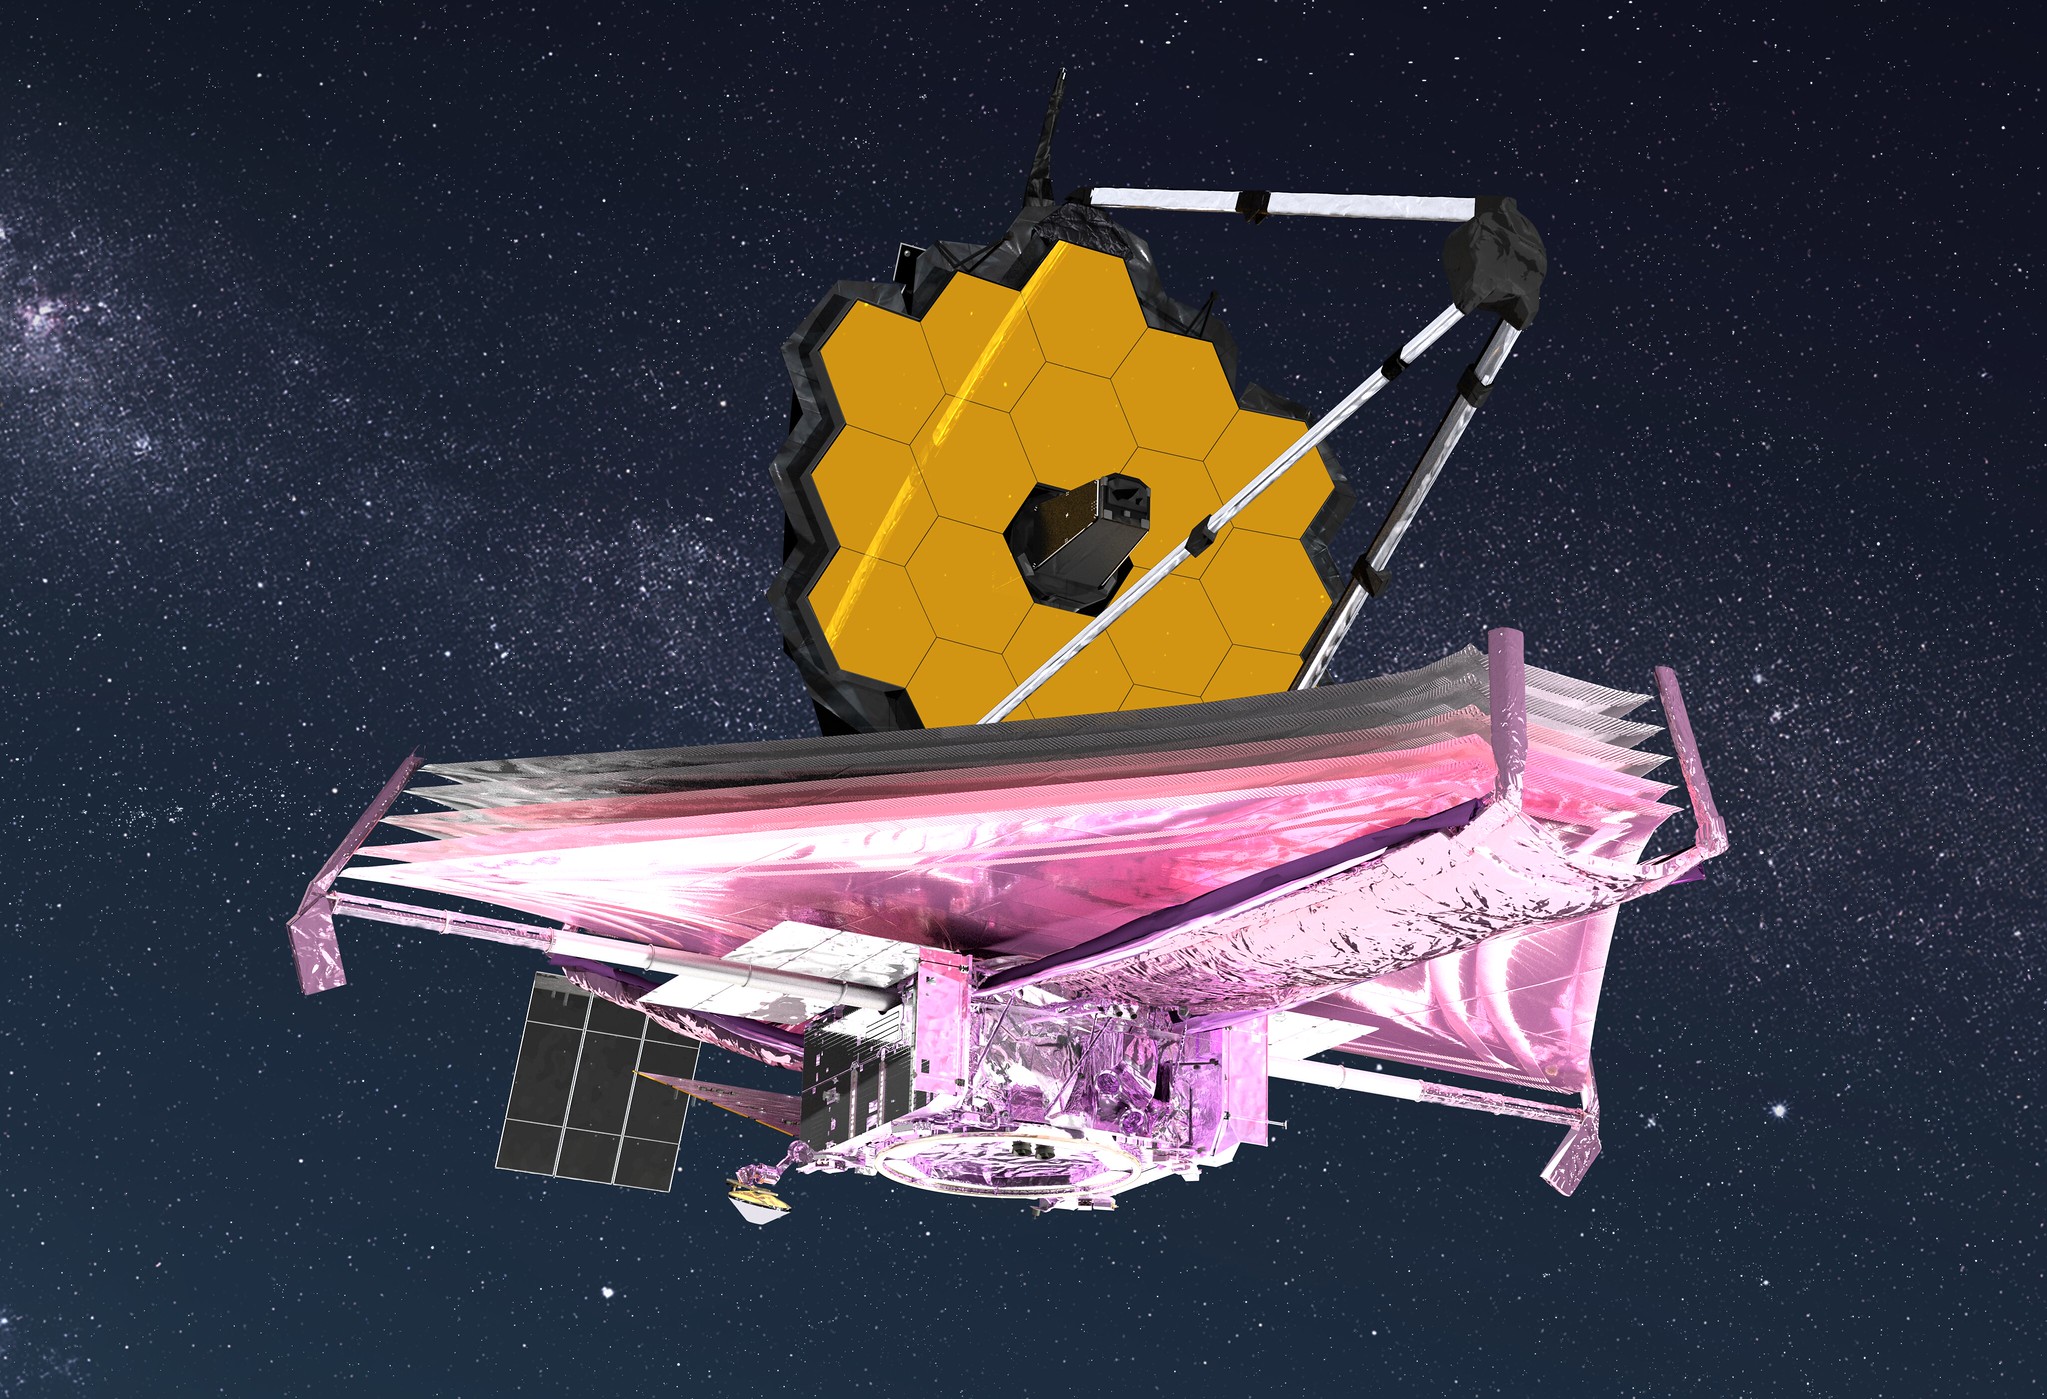 computer generated rendering of giant telescope with hexagonal mirrors and floating against star-spattered space background